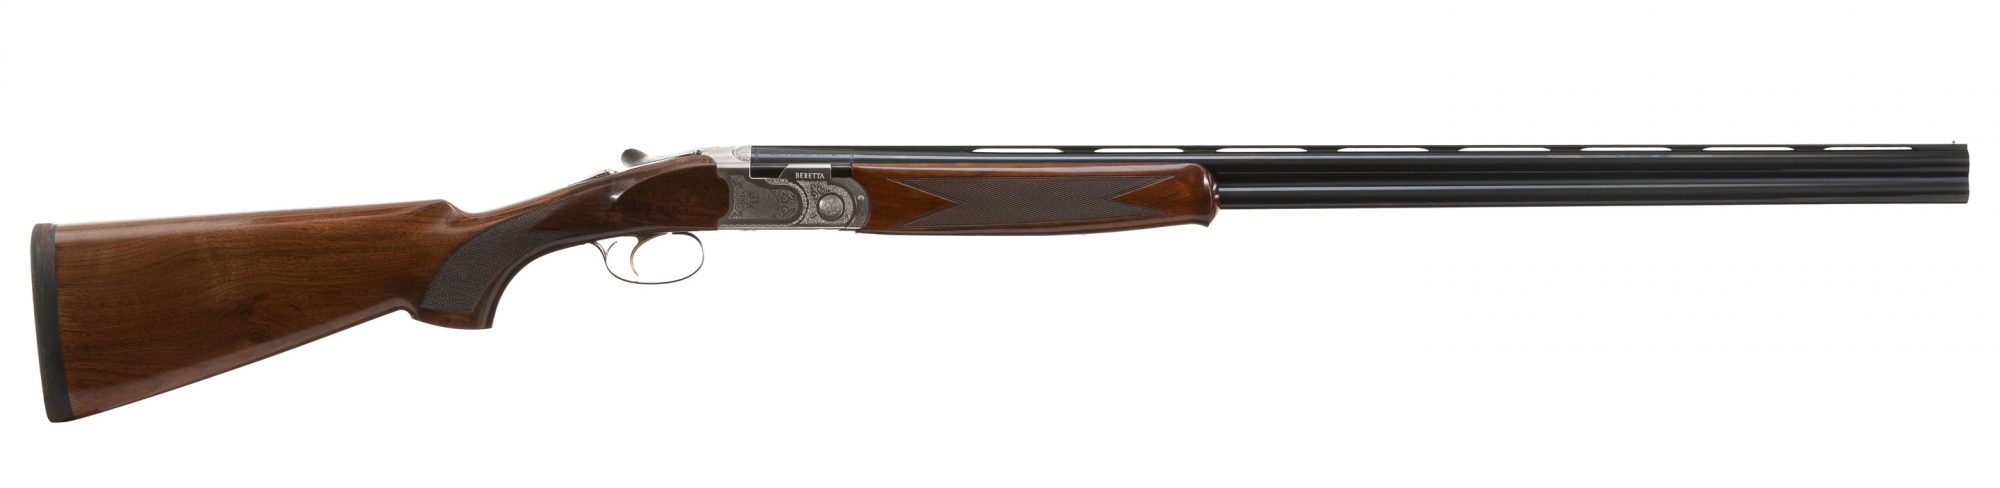 Photo of a pre-owned Beretta 686 Silver Pigeon I 28 gauge shotgun, for sale by Turnbull Restoration of Bloomfield, NY